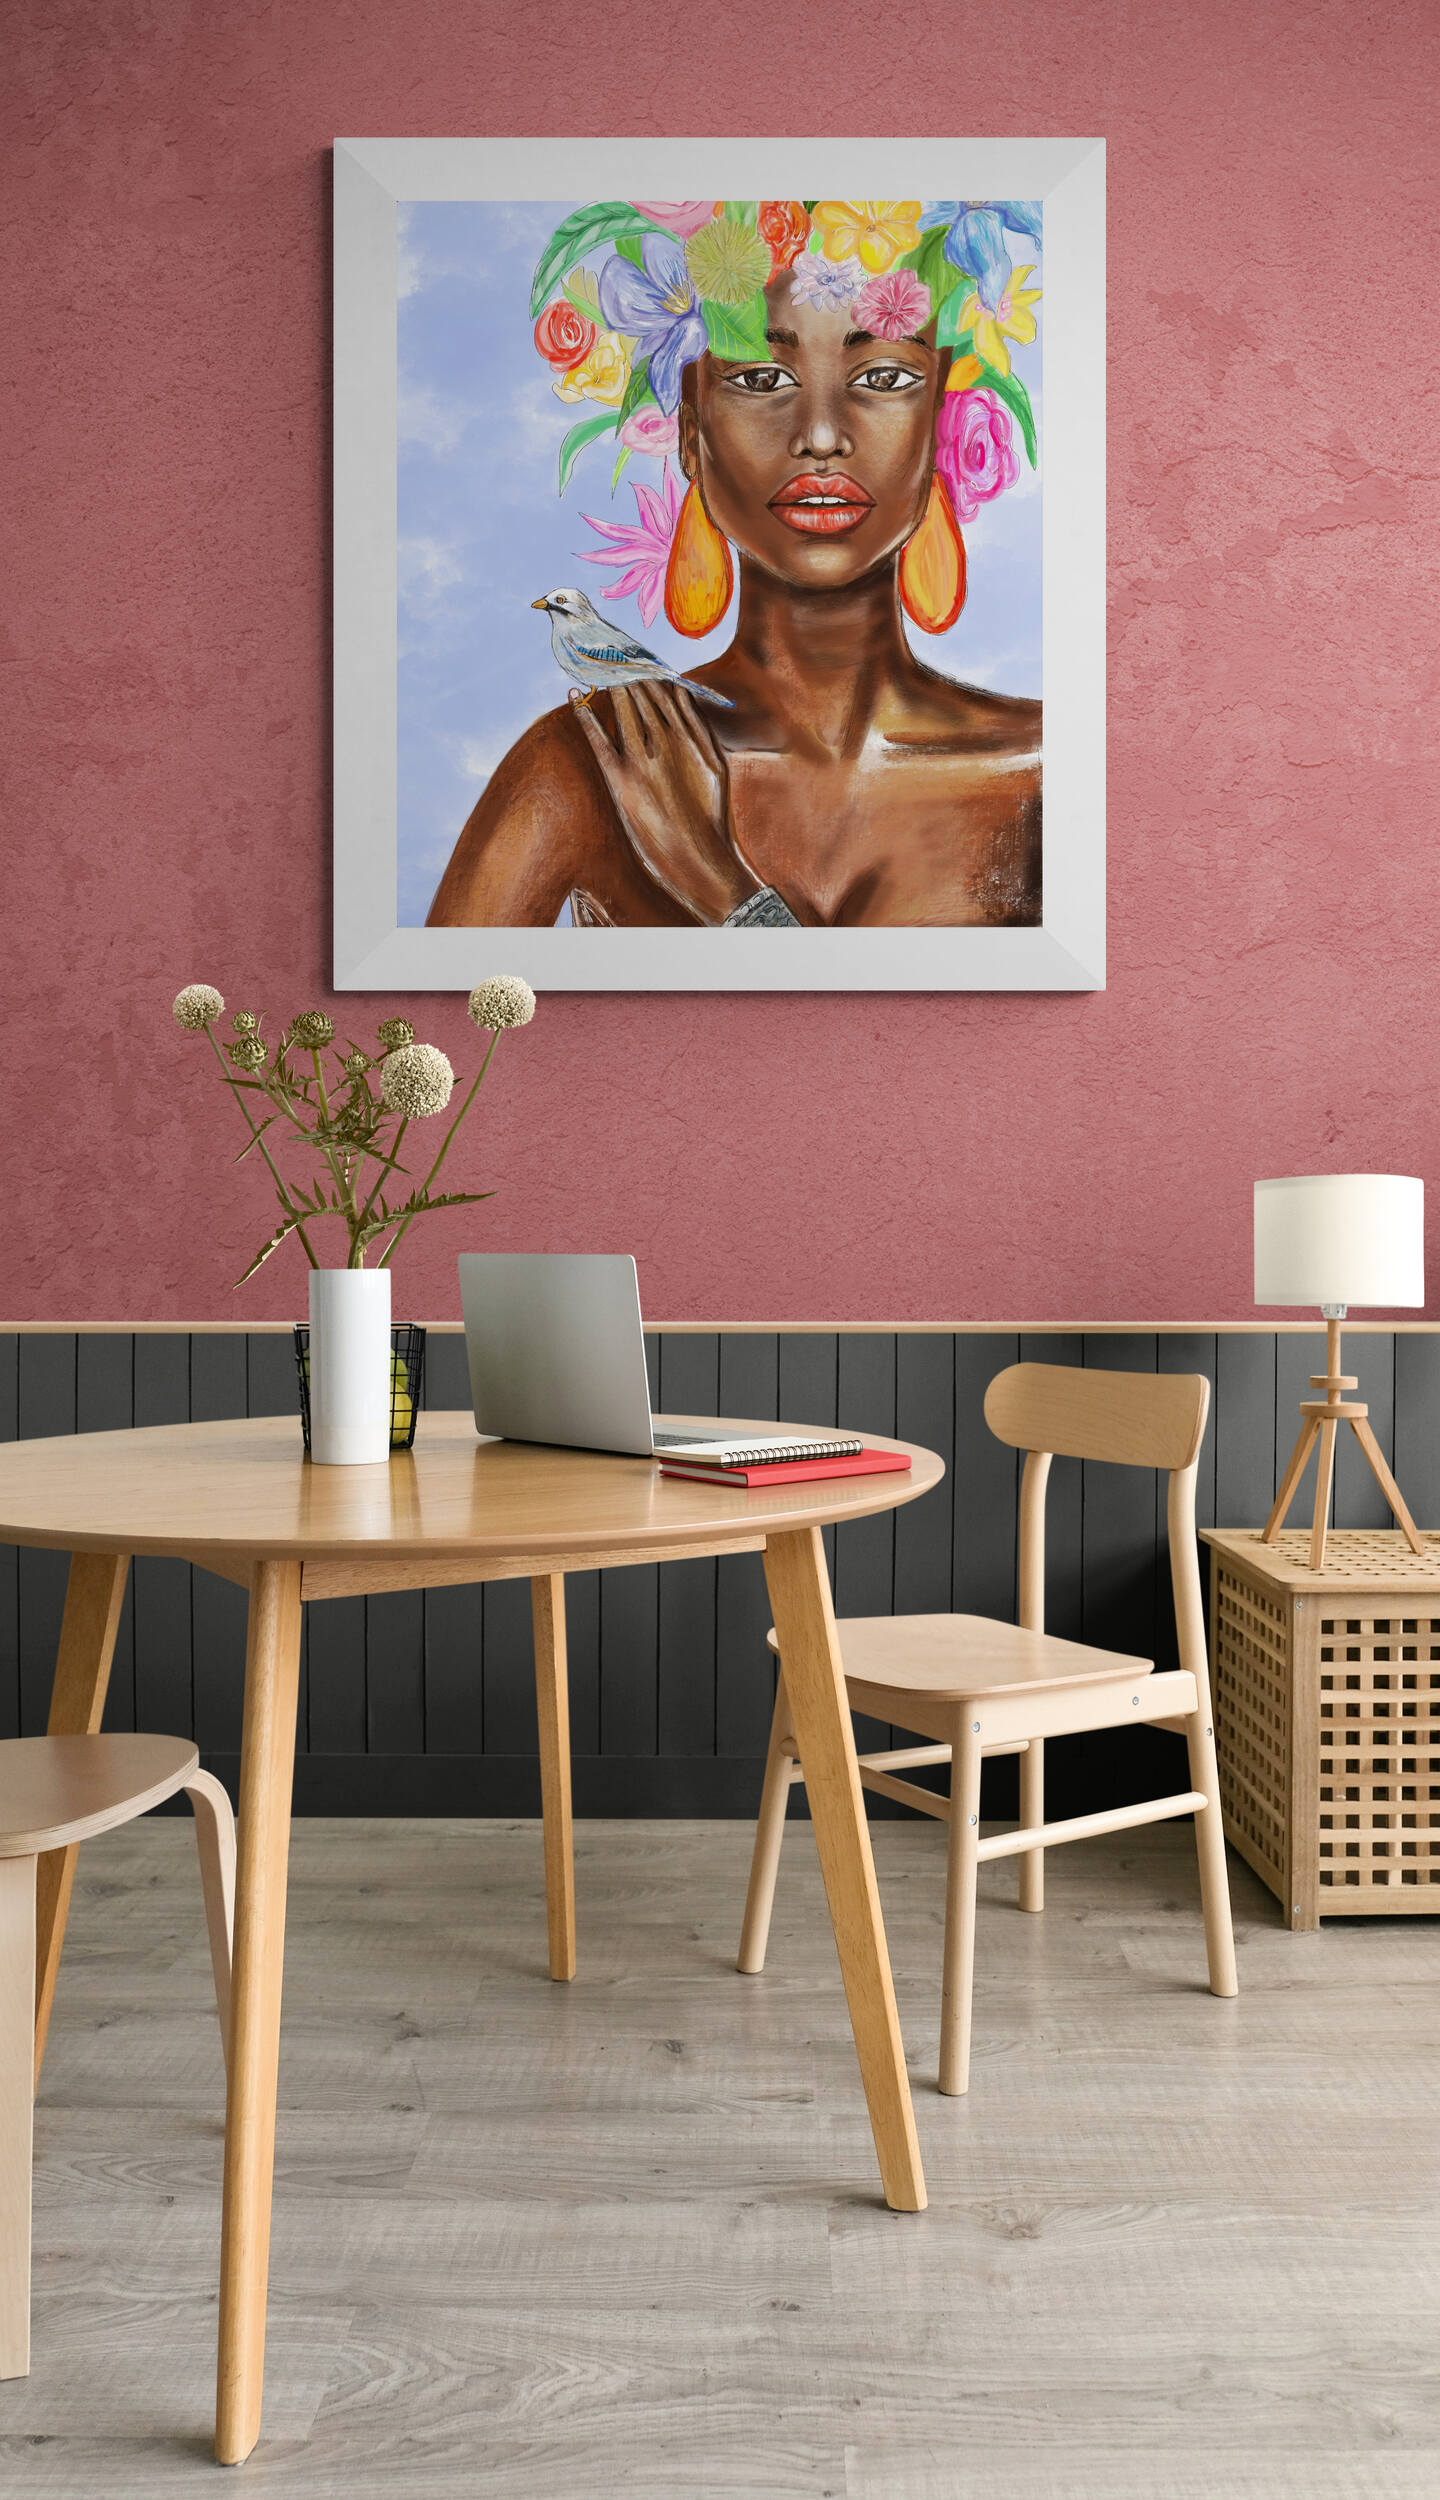 Illustrated winged woman, canvas print